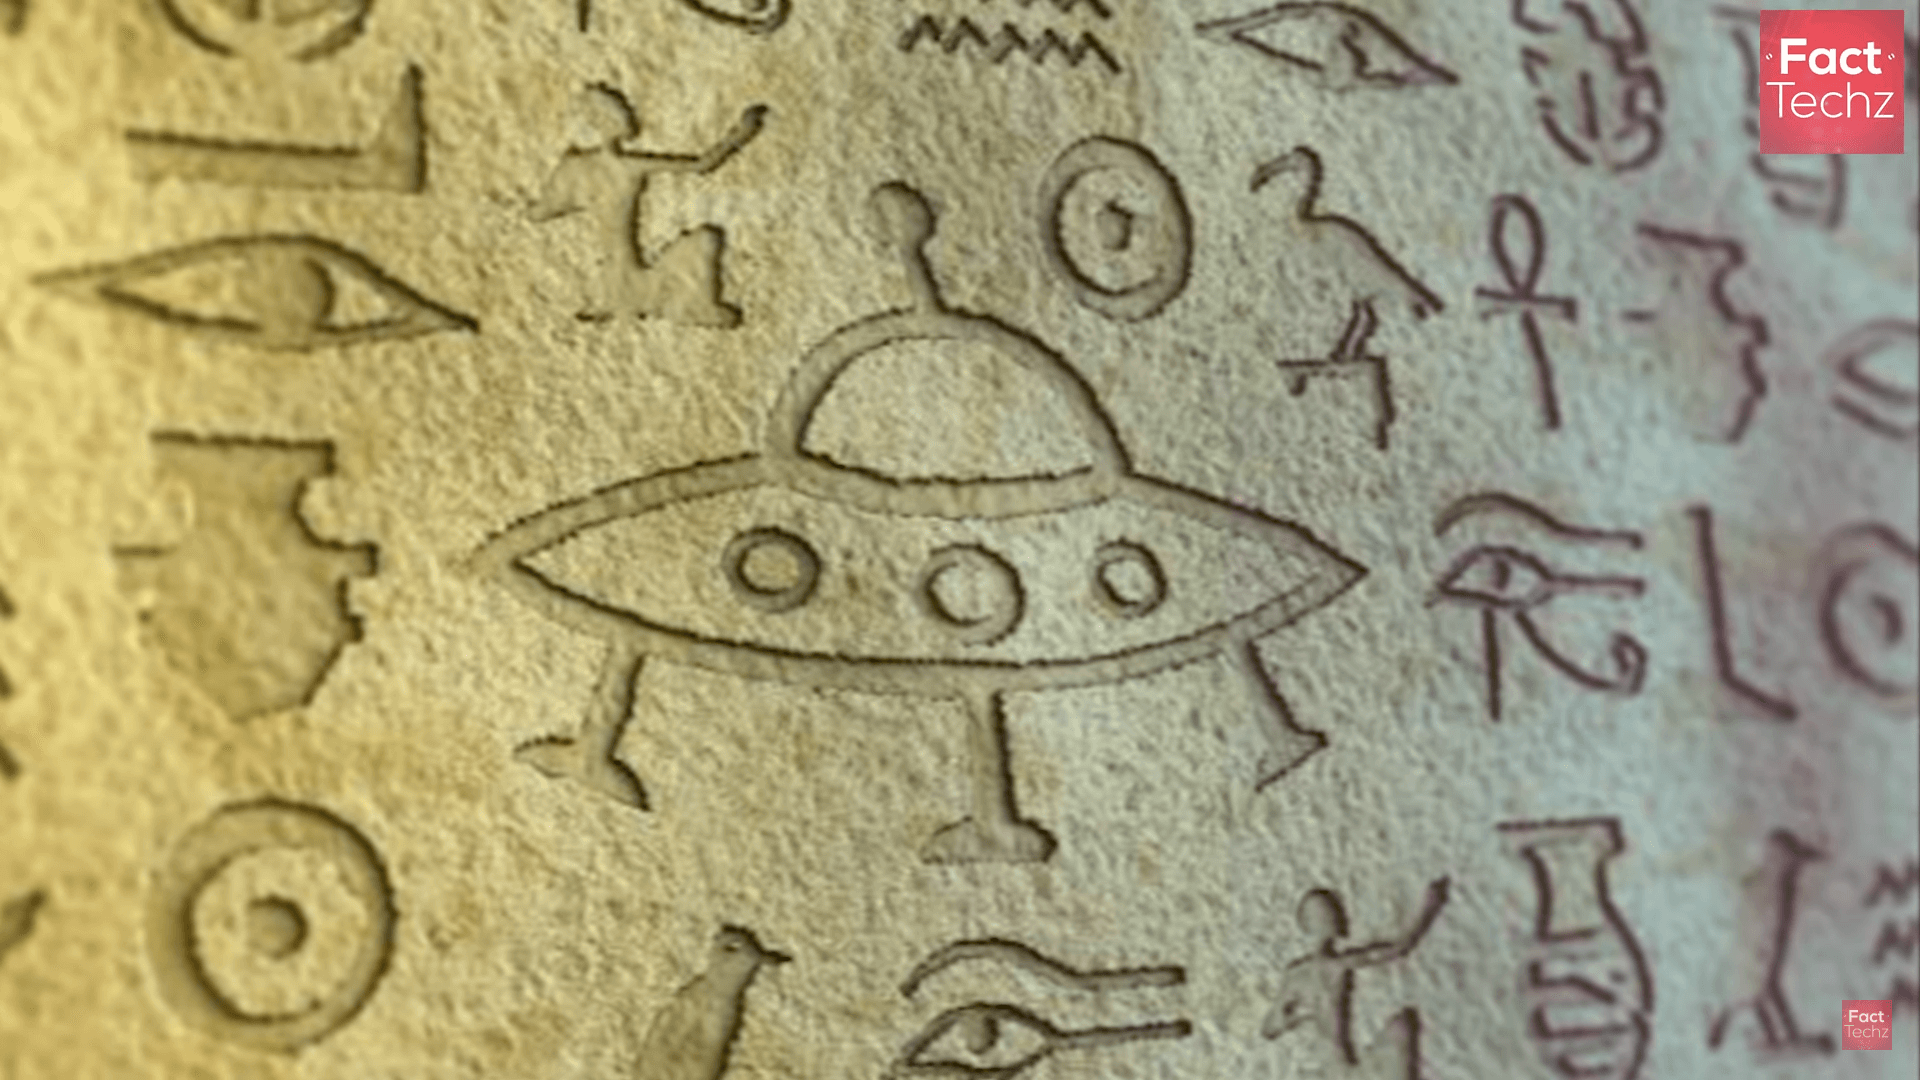 depiction of modern day UFOs found on a wall painting in pyramids Awesome pyramid facts one